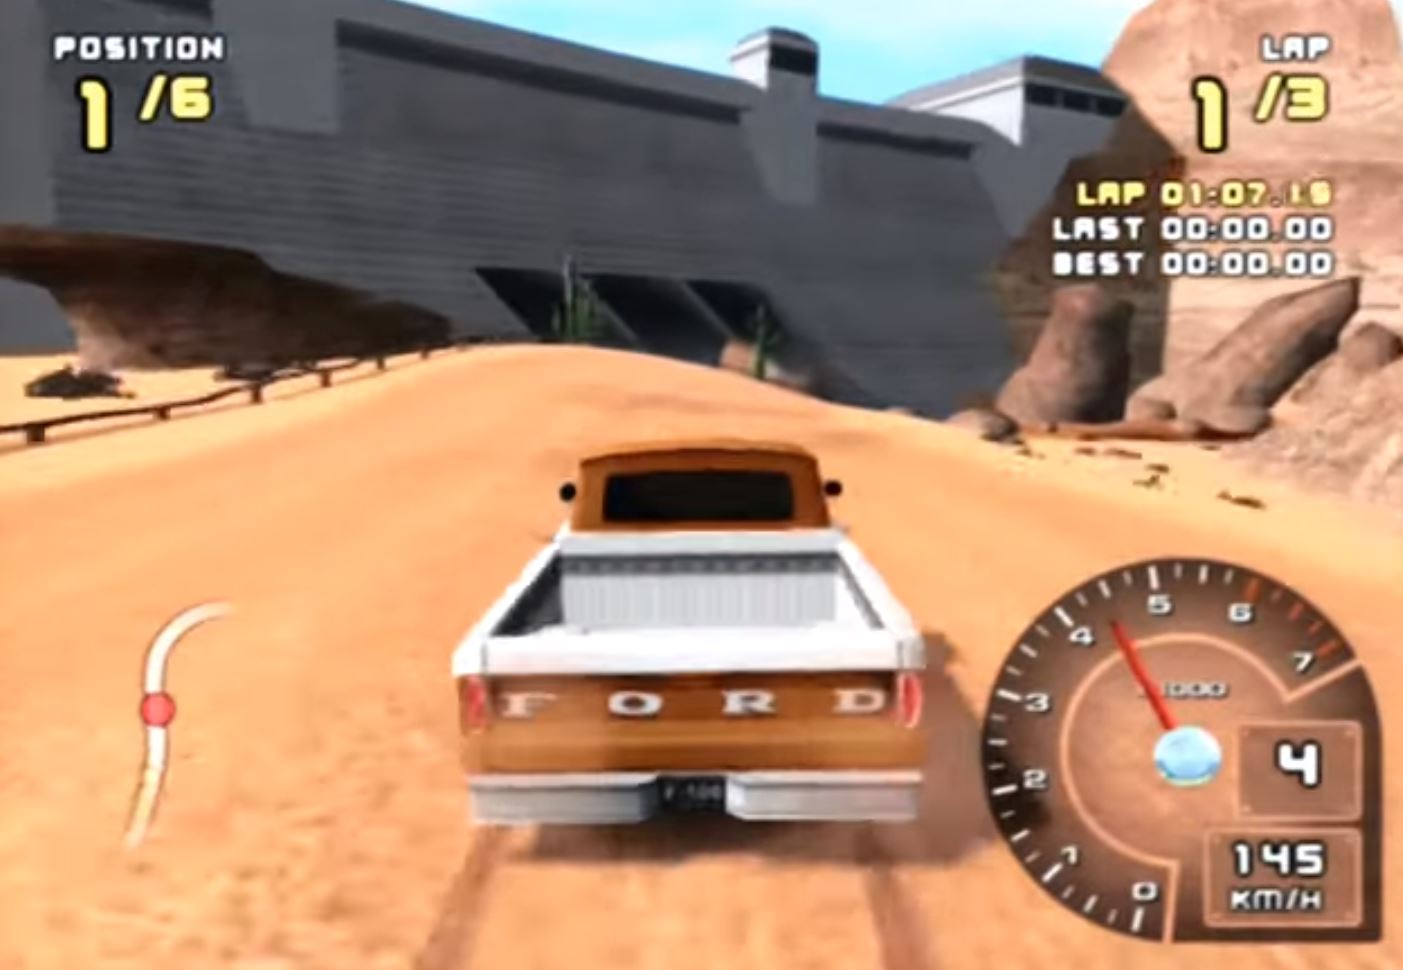 cars ps2 game saves